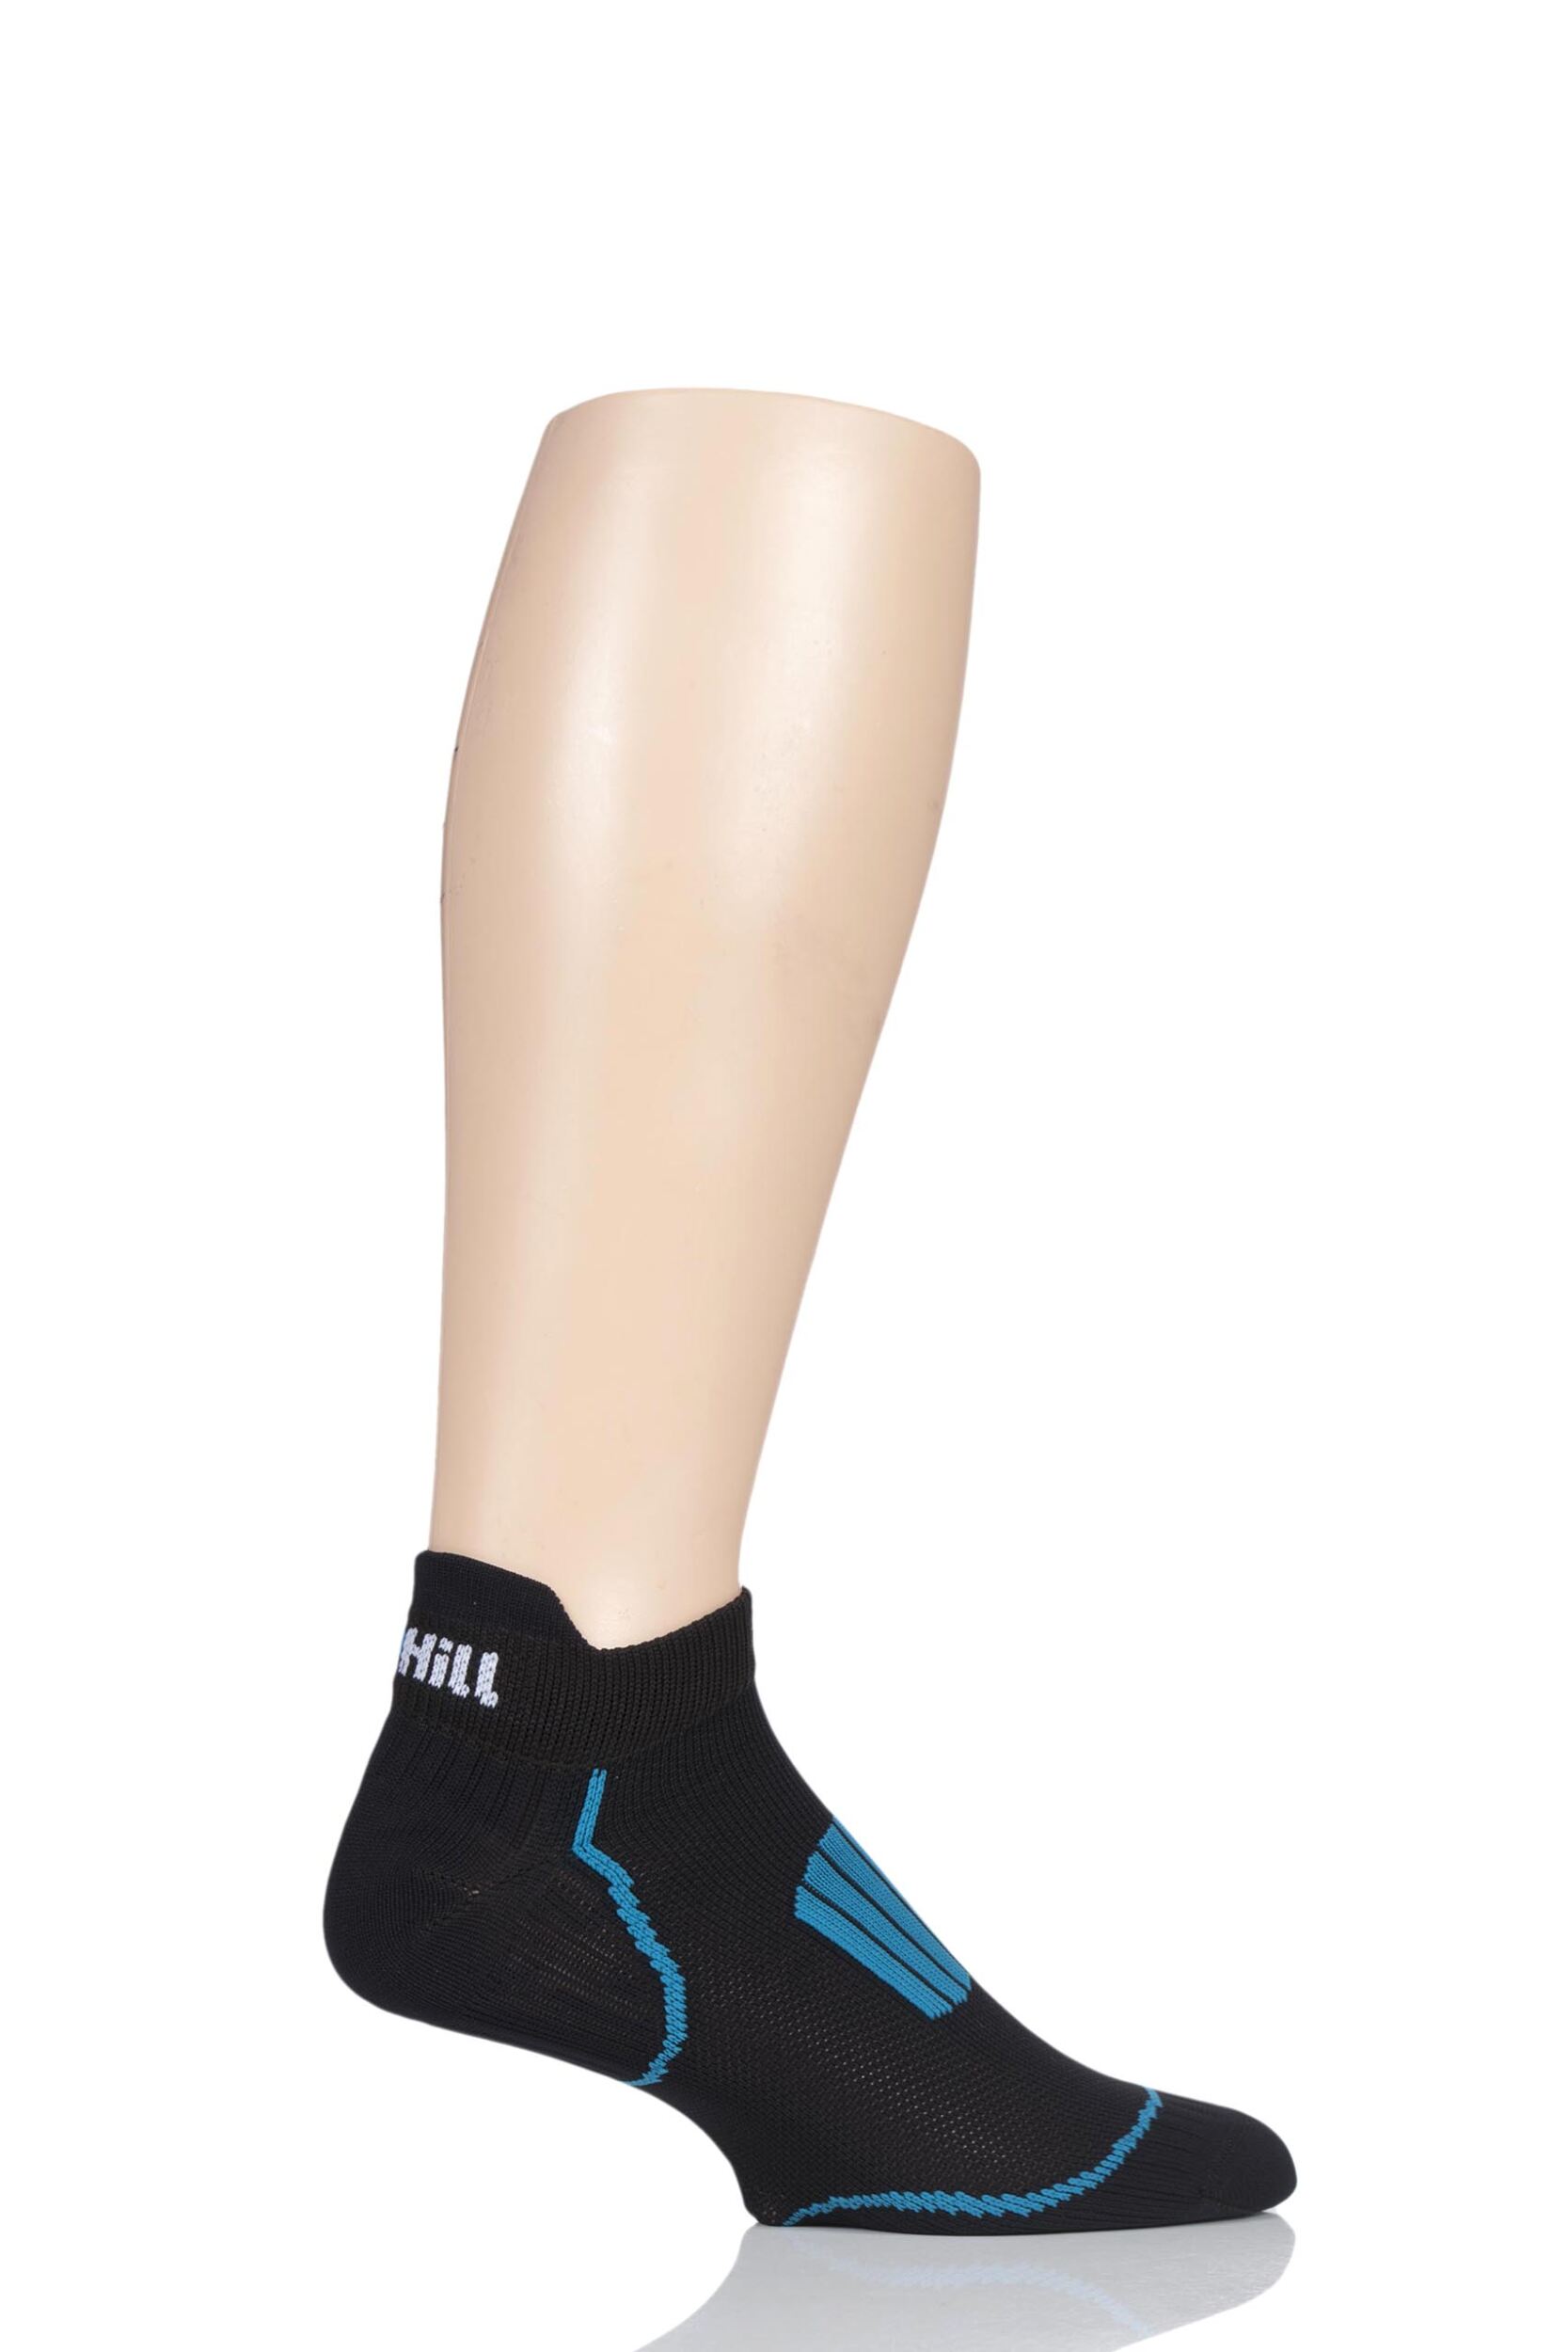 1 Pair Black Made in Finland Extra Fit Low Trainer Socks Unisex 5.5-8 Mens - Uphill Sport